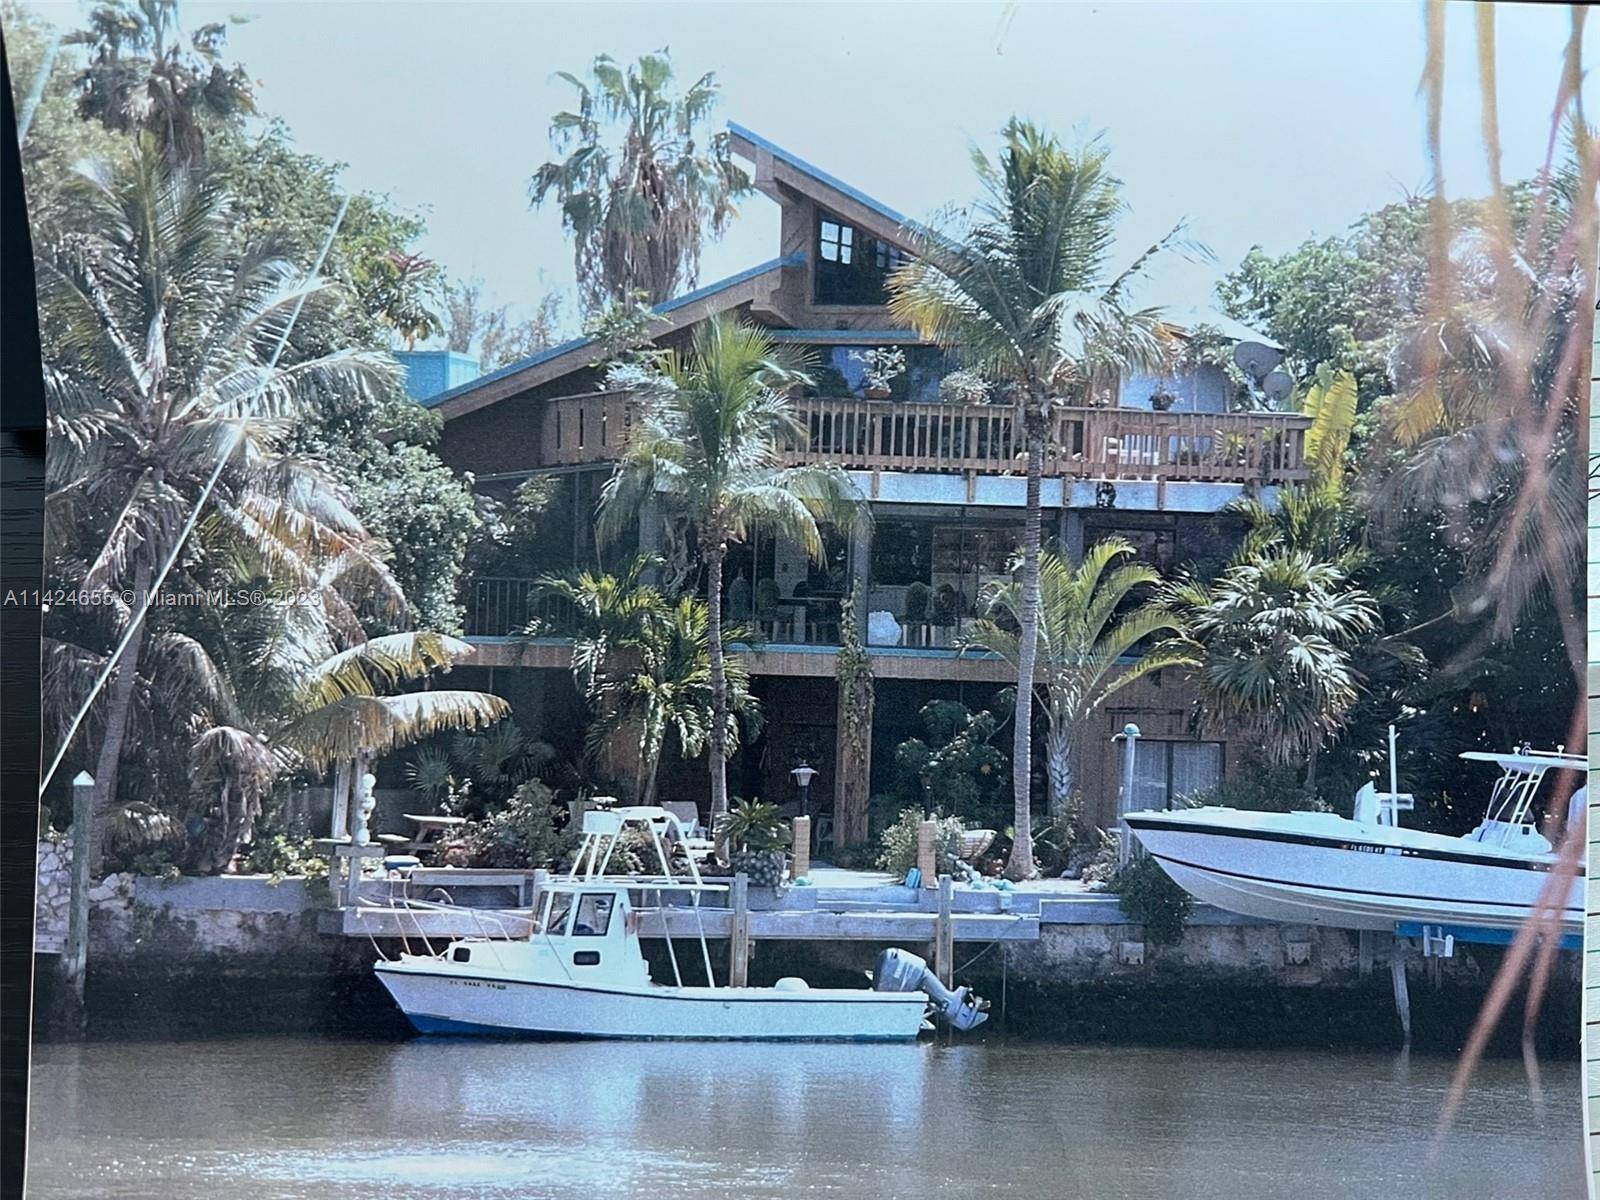 Large 3 story, Boater's Paradise home, located inside gated community of Plantation Lakes Estate with direct lagoon water views and ocean access for large boat.